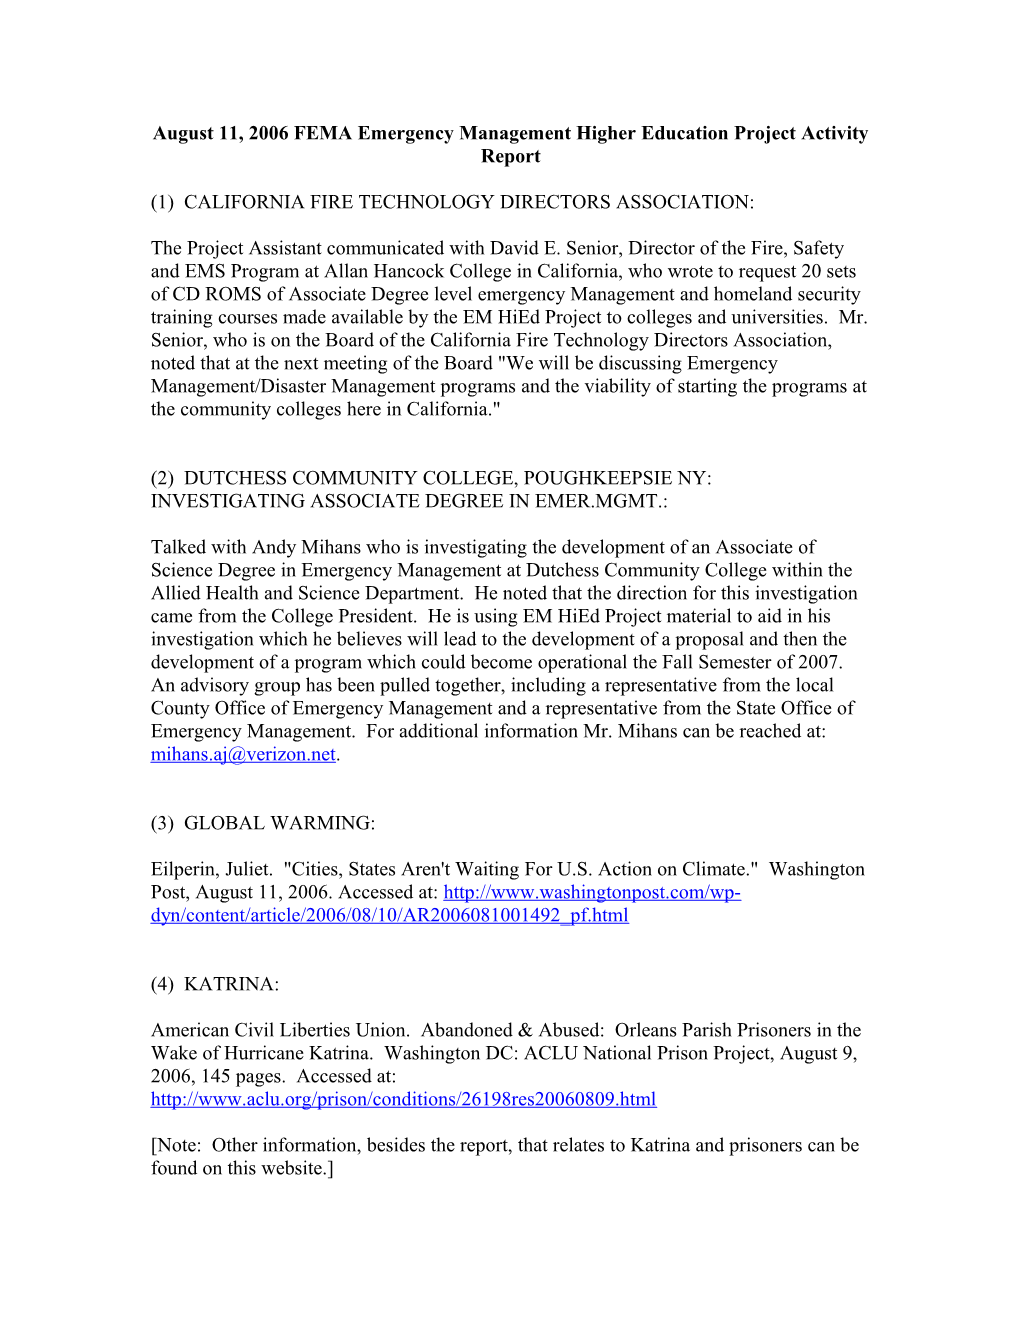 August 11, 2006 FEMA Emergency Management Higher Education Project Activity Report